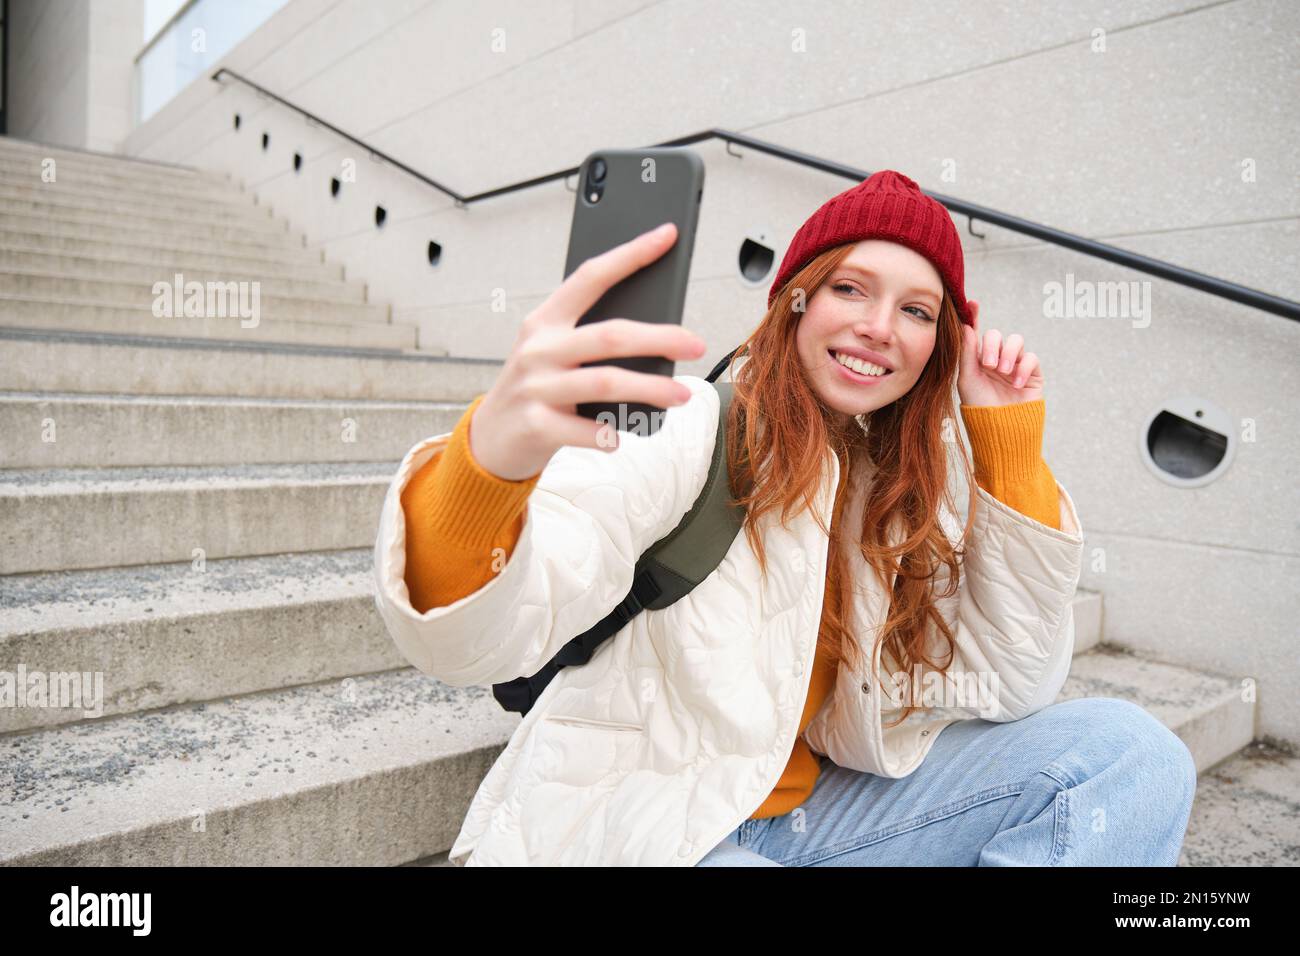 Urban girl takes selfie on street stairs, uses smartphone app to take photo of herself, poses for social media application. Stock Photo